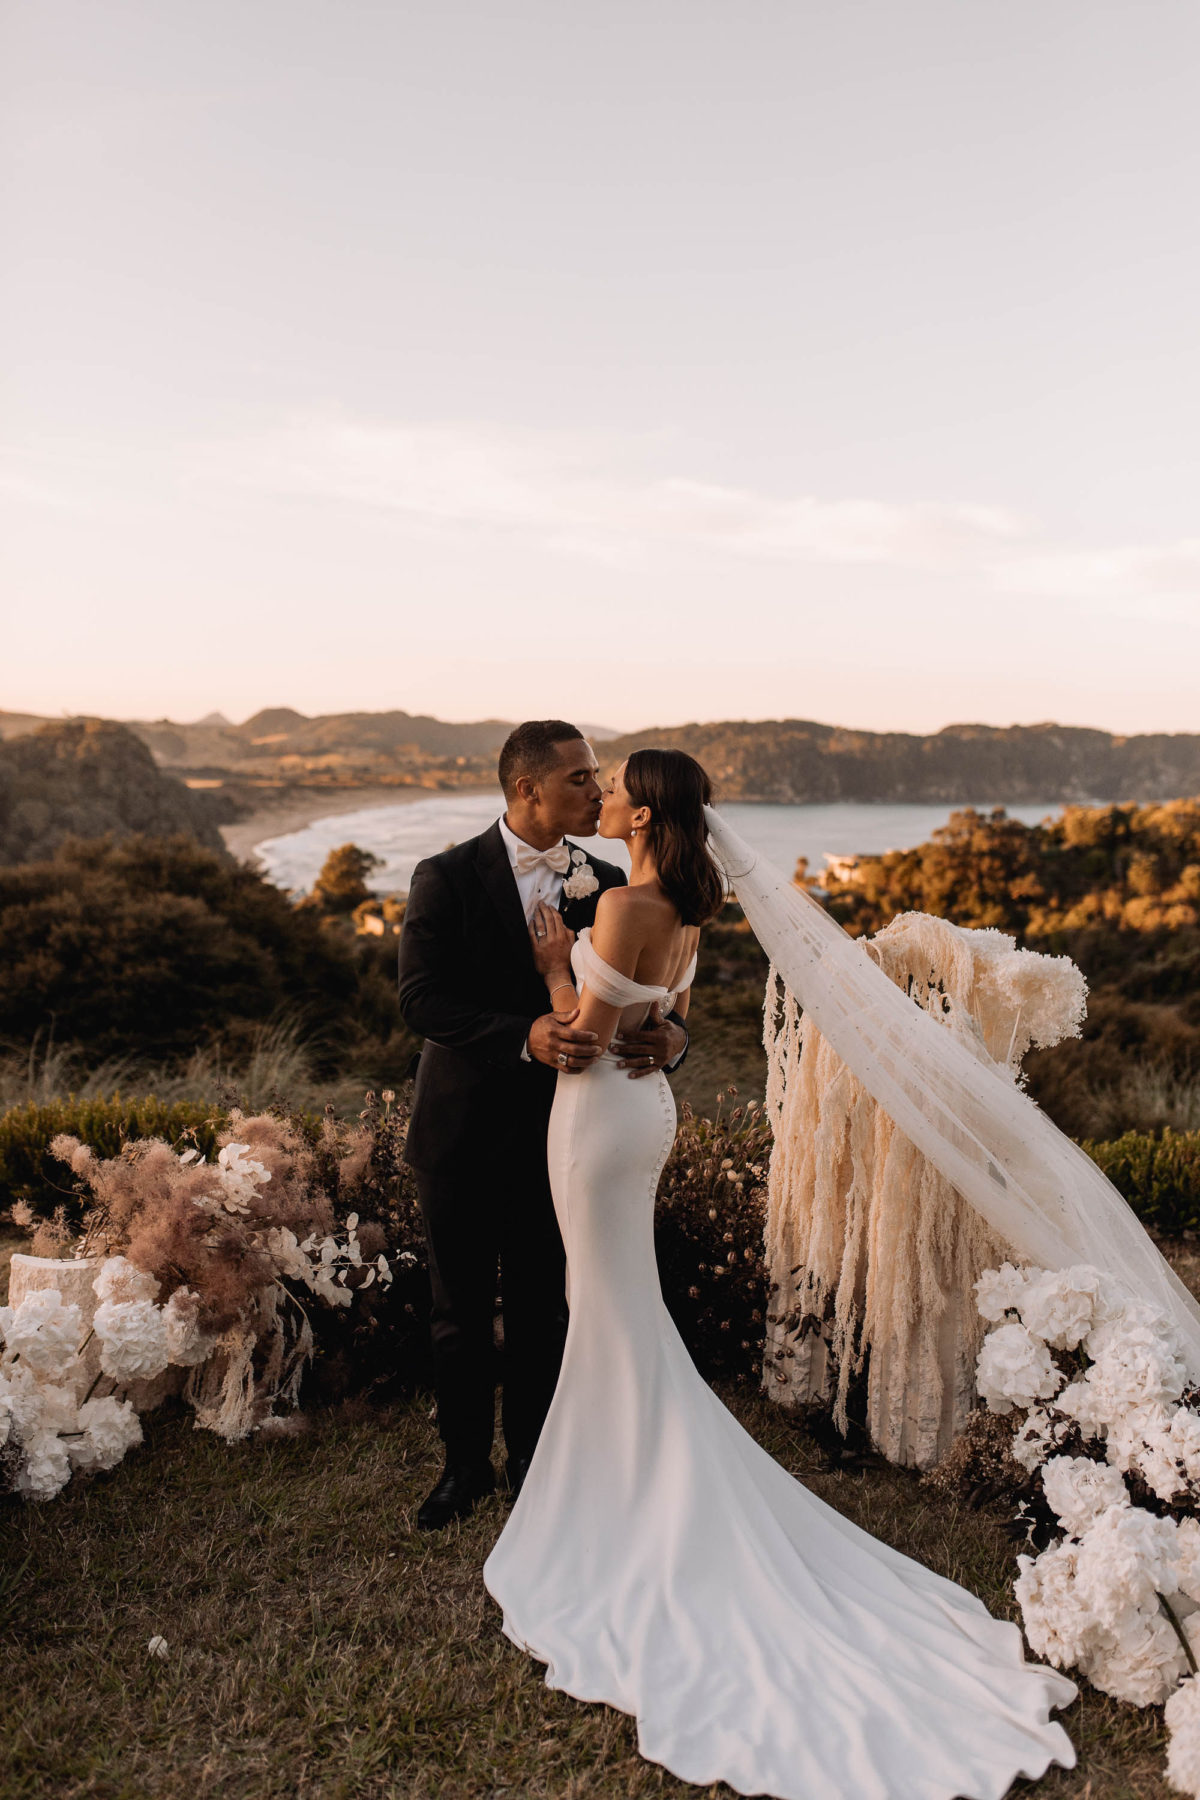 Bride and groom kiss on the cliffs in New Zealand - the perfect destination wedding location